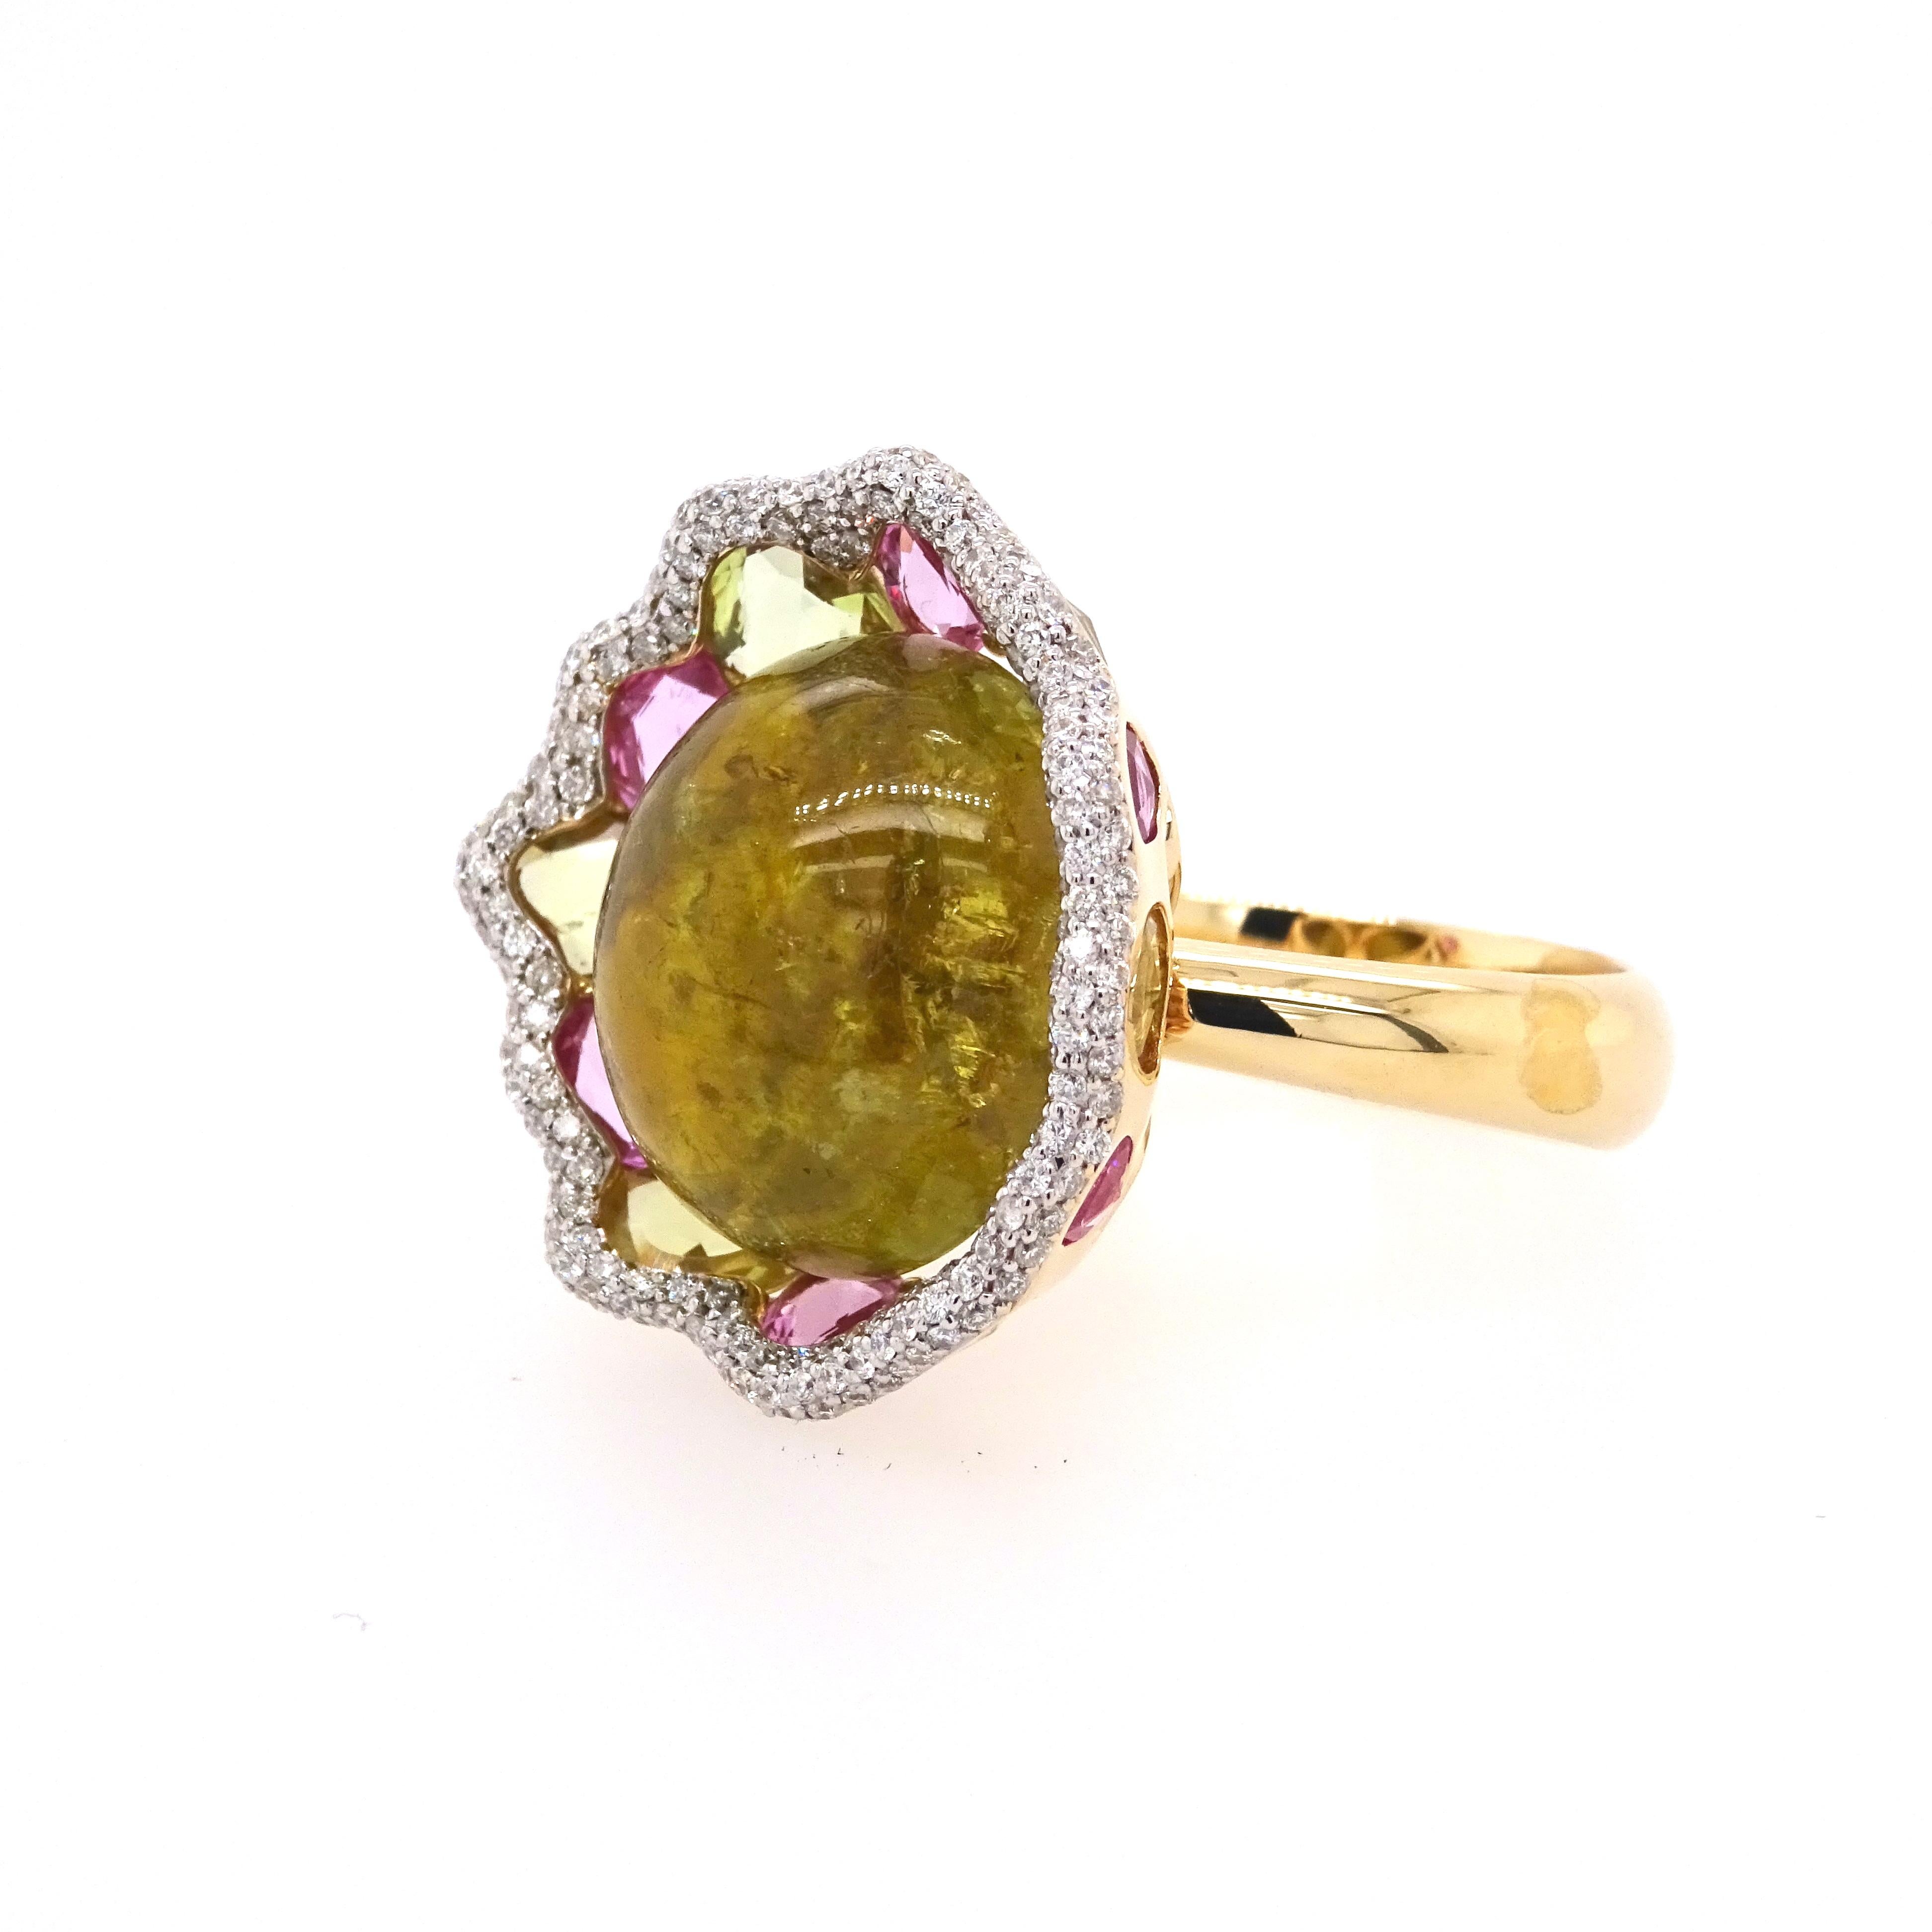 Uncut 18K Gold Ring with White Diamonds, Fancy Sapphires and a Centre Tourmaline For Sale